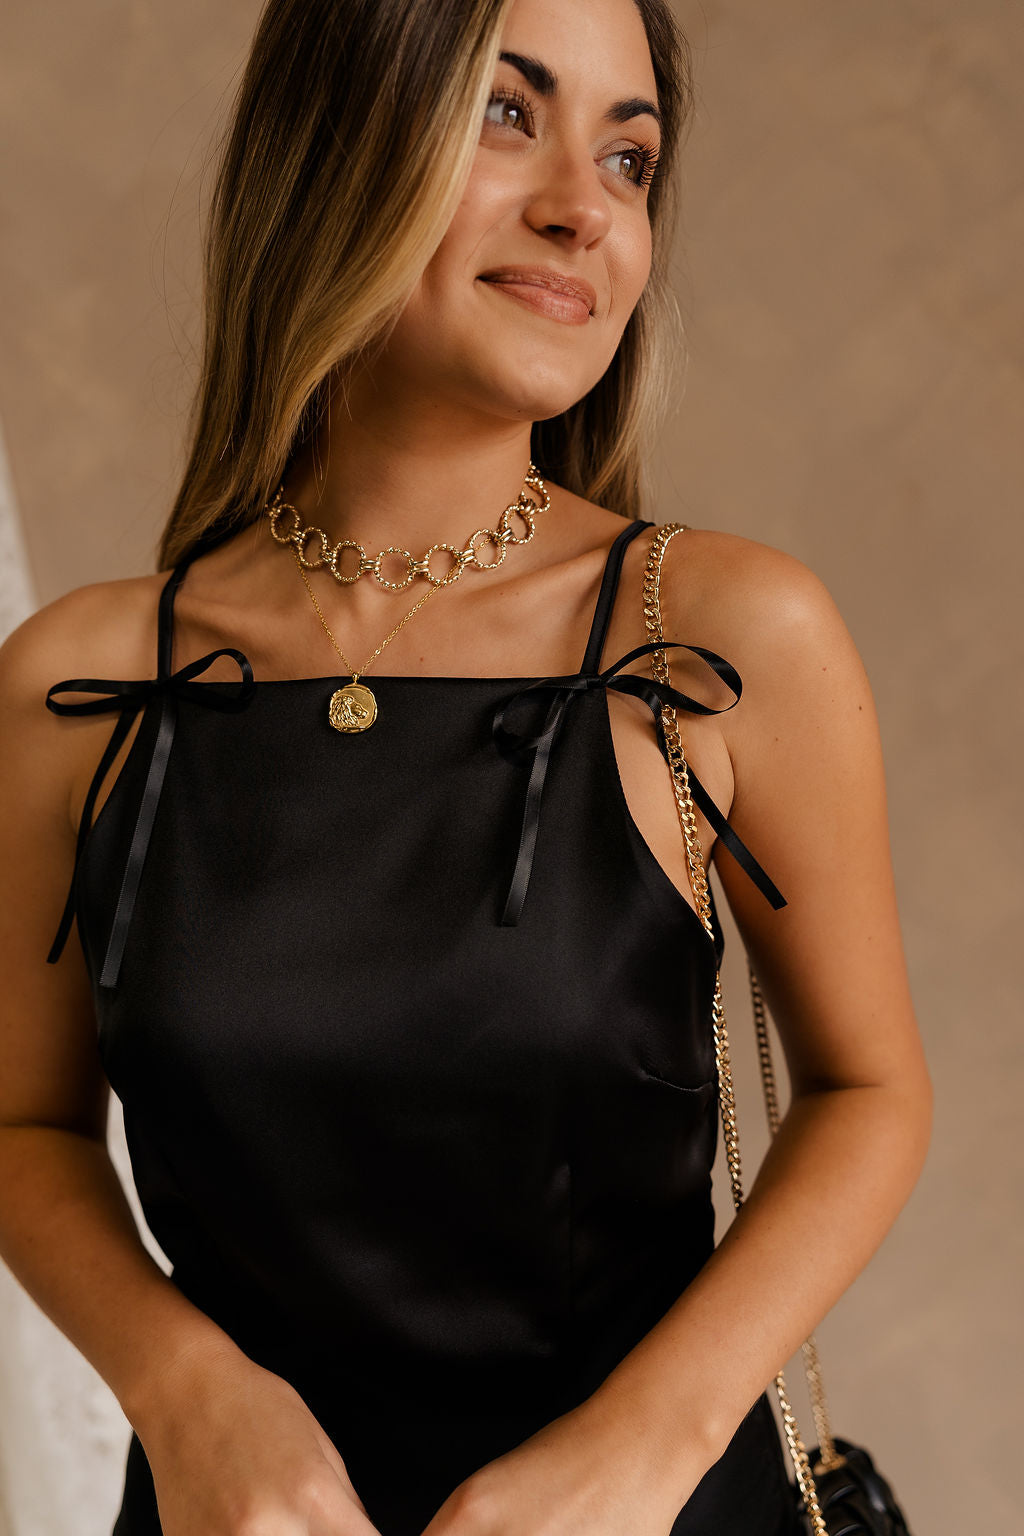 Upper body front view of model wearing the Monica Black Satin Mini Dress that features black satin fabric, thin straps with bow details, a square neck, and mini length.